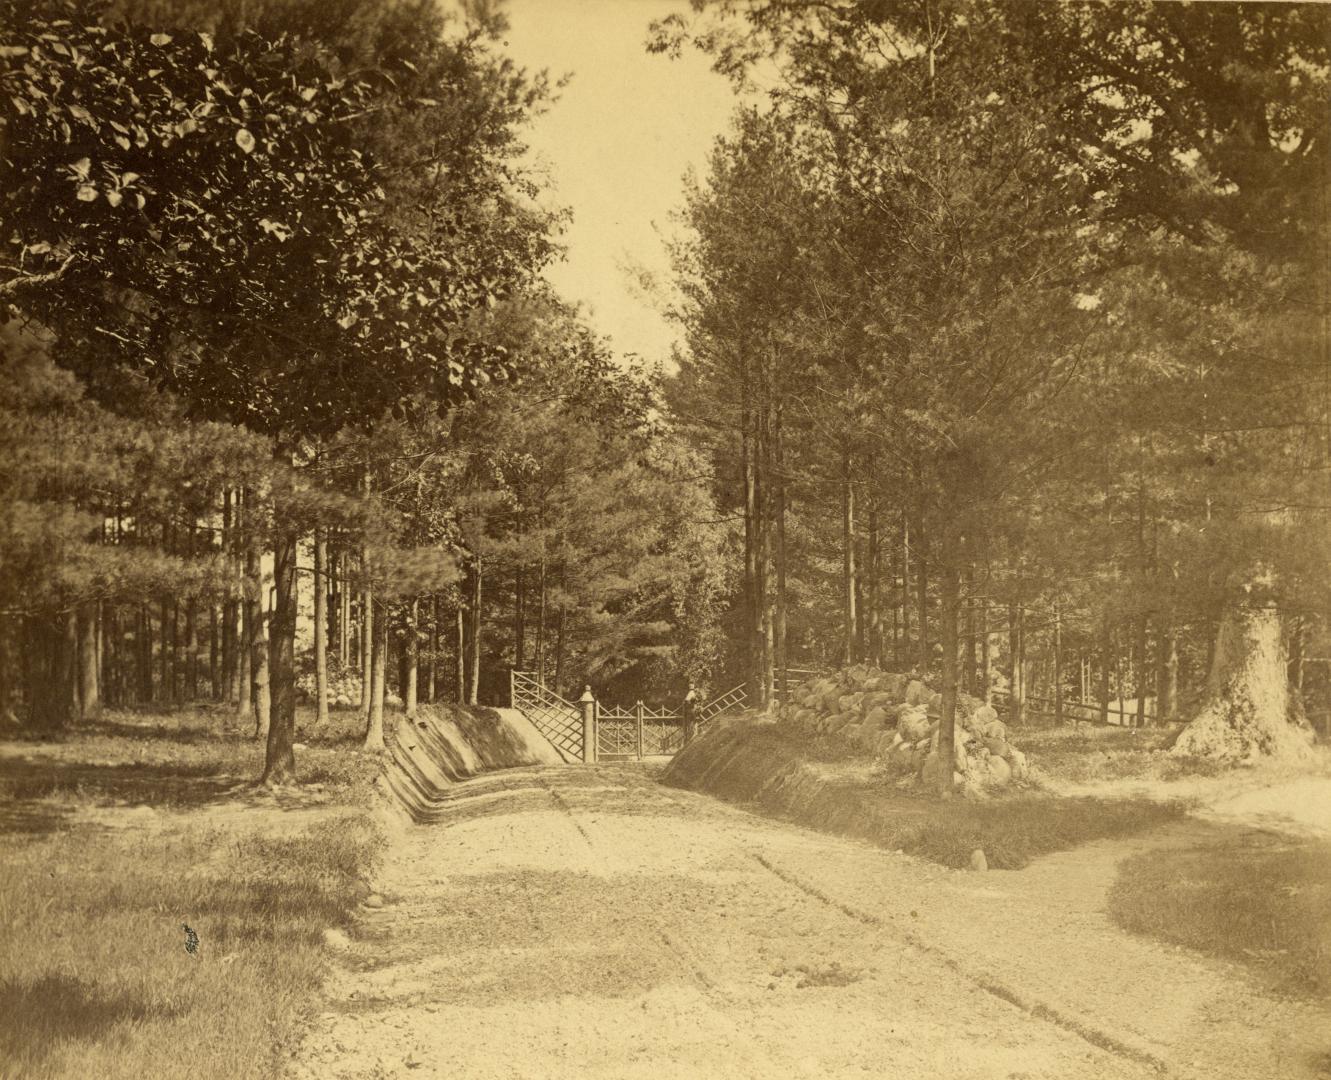 Image shows a road view with a lot of trees on both sides.